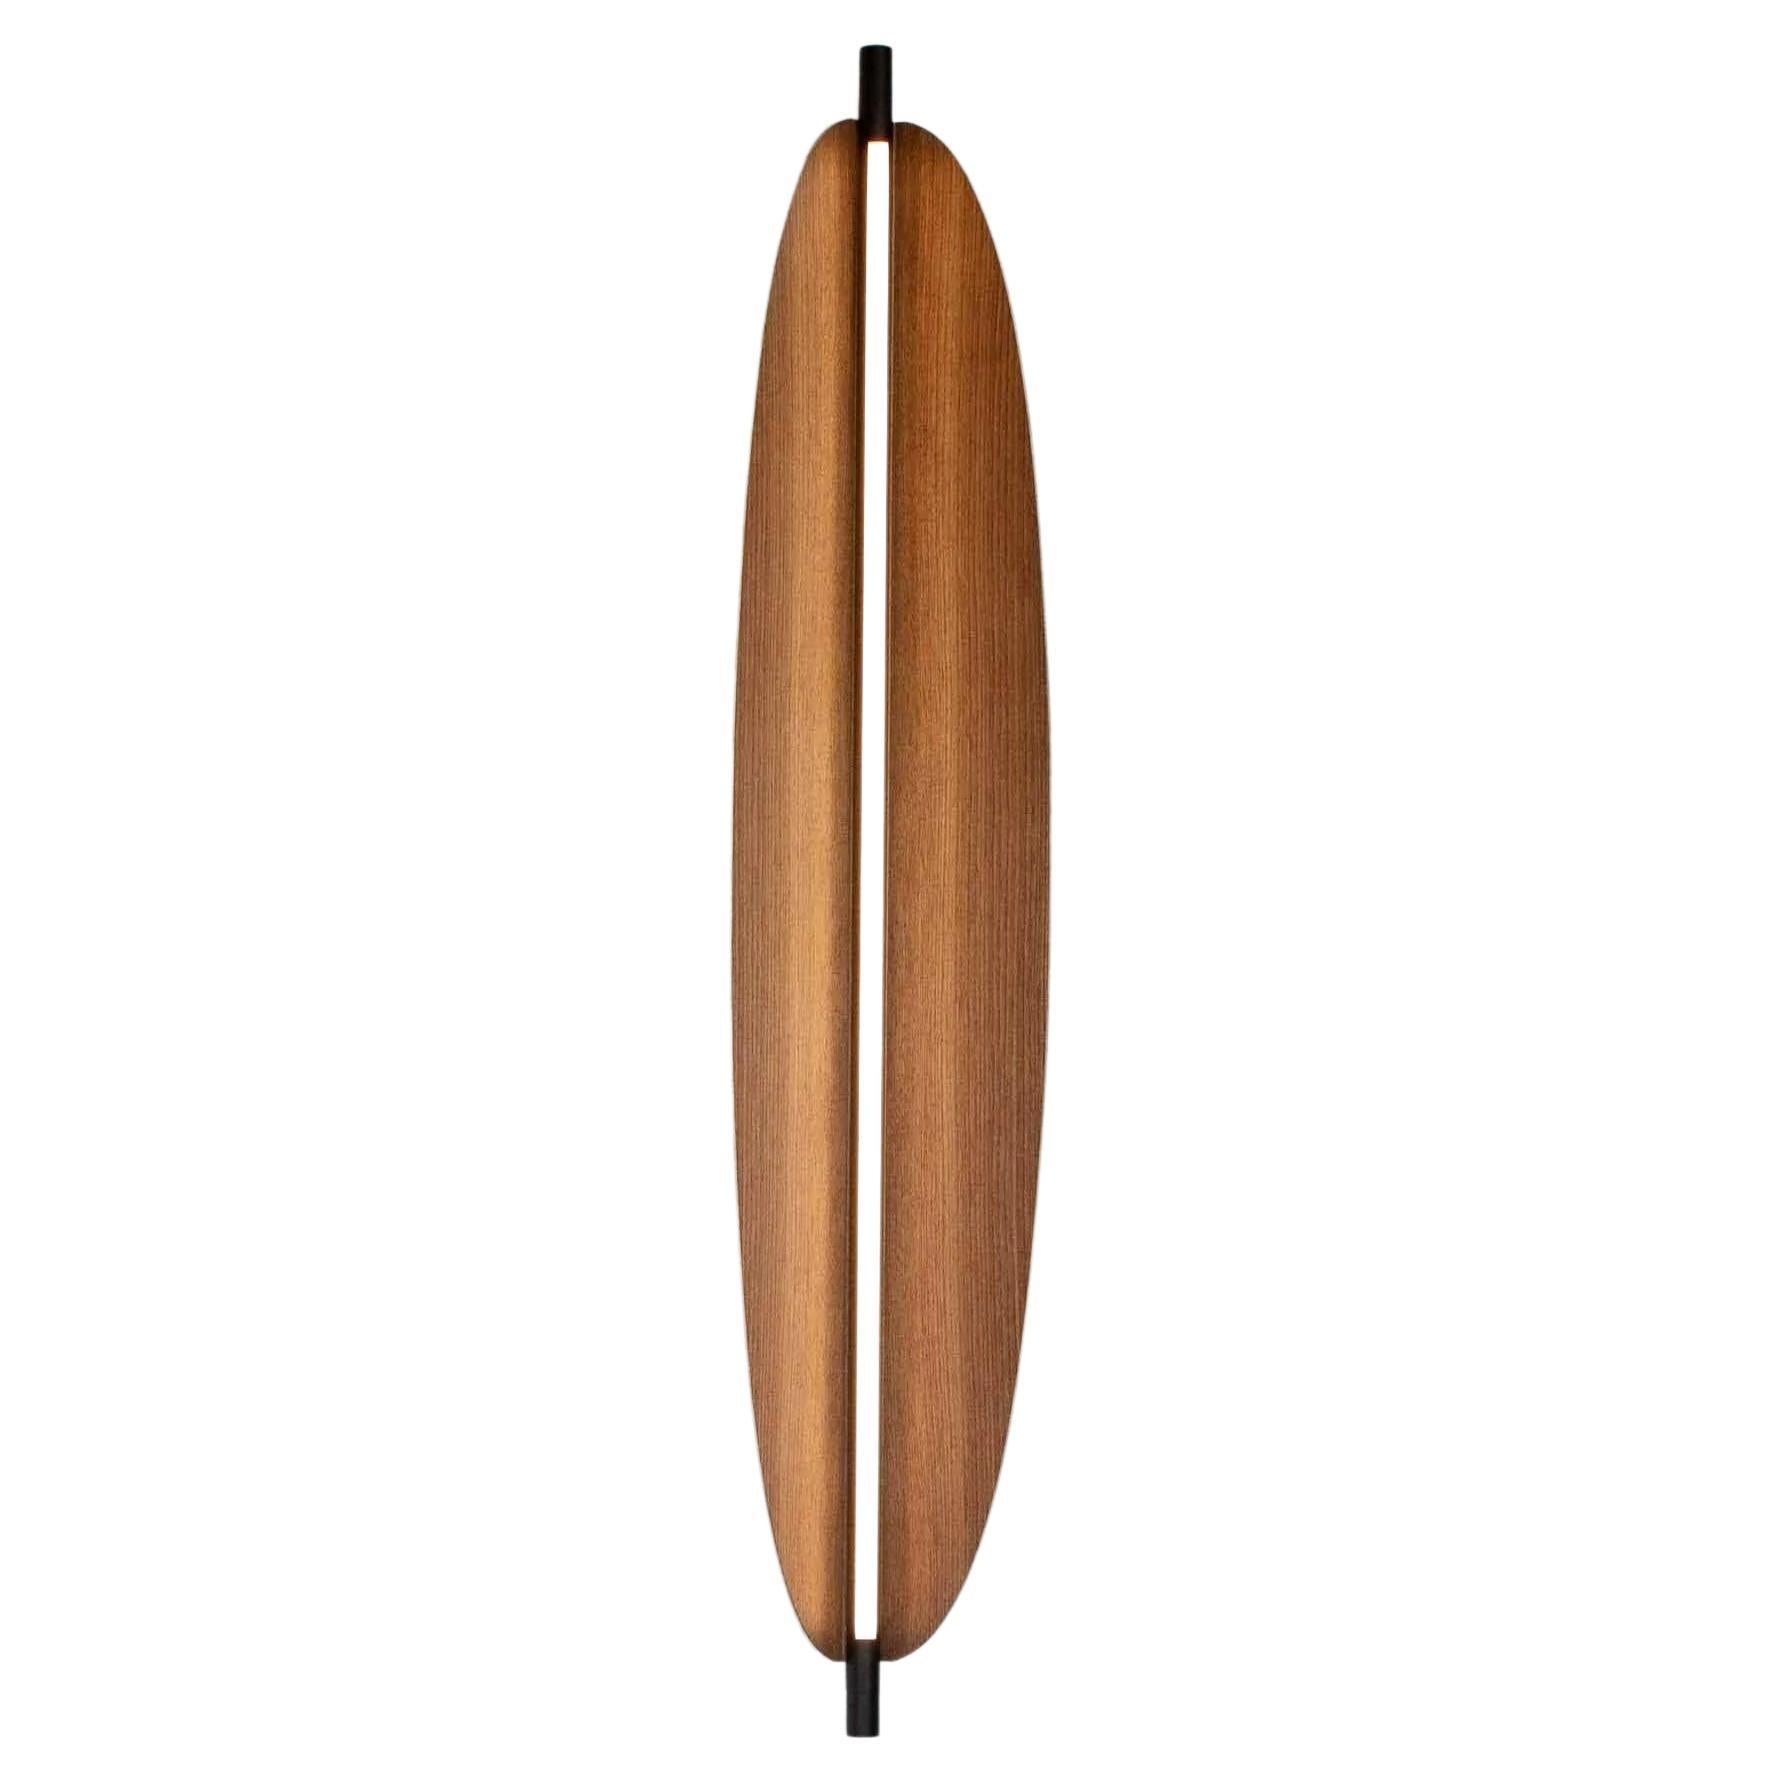 Contemporary Wall Lamp 'Thula 562.43' by Federica Biasi x Tooy, Black + Walnut For Sale